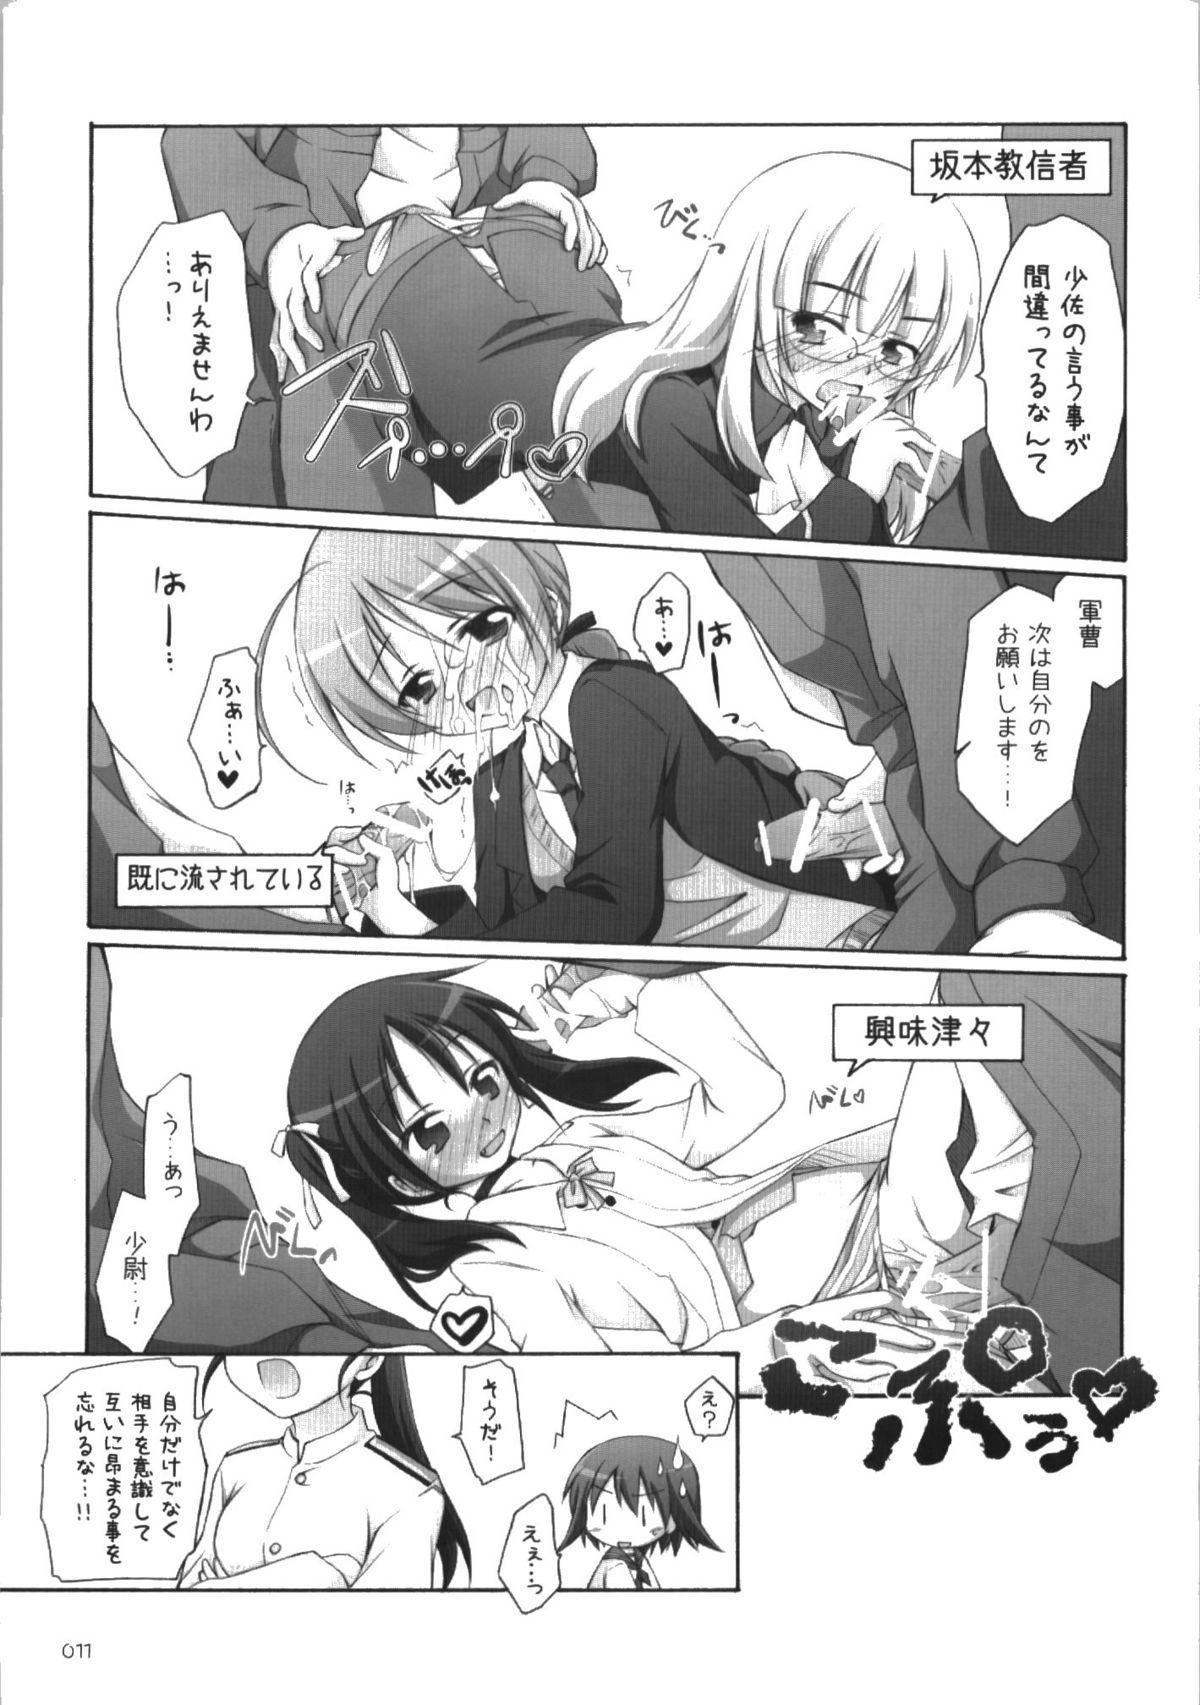 Transvestite s.n.e.g? - Strike witches Culo - Page 11